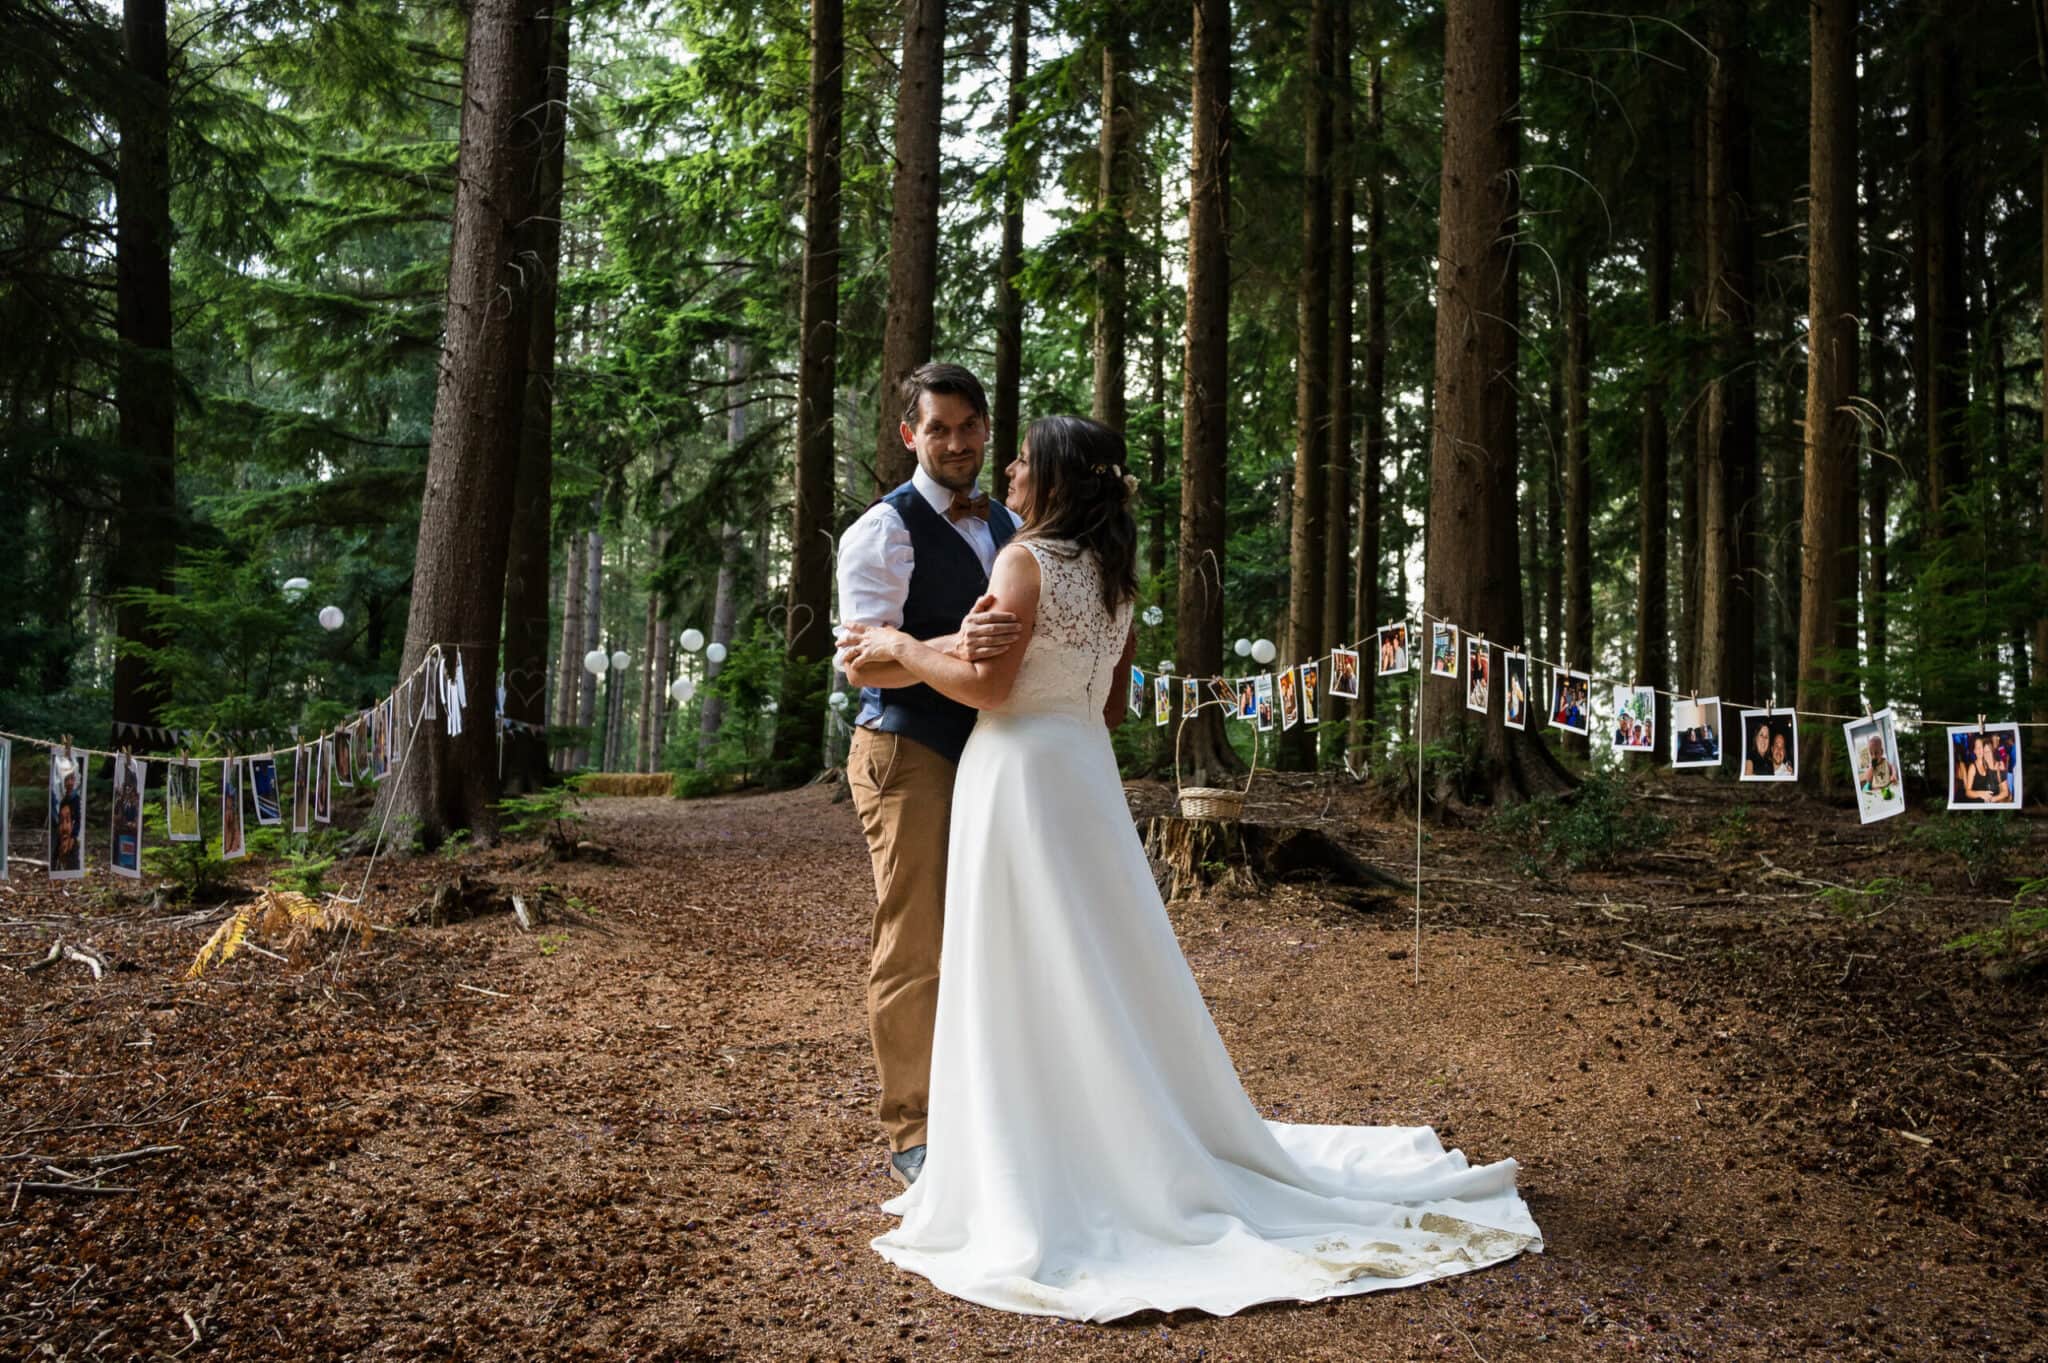 Bride and Groom in the New Forest Weddings in the Wood